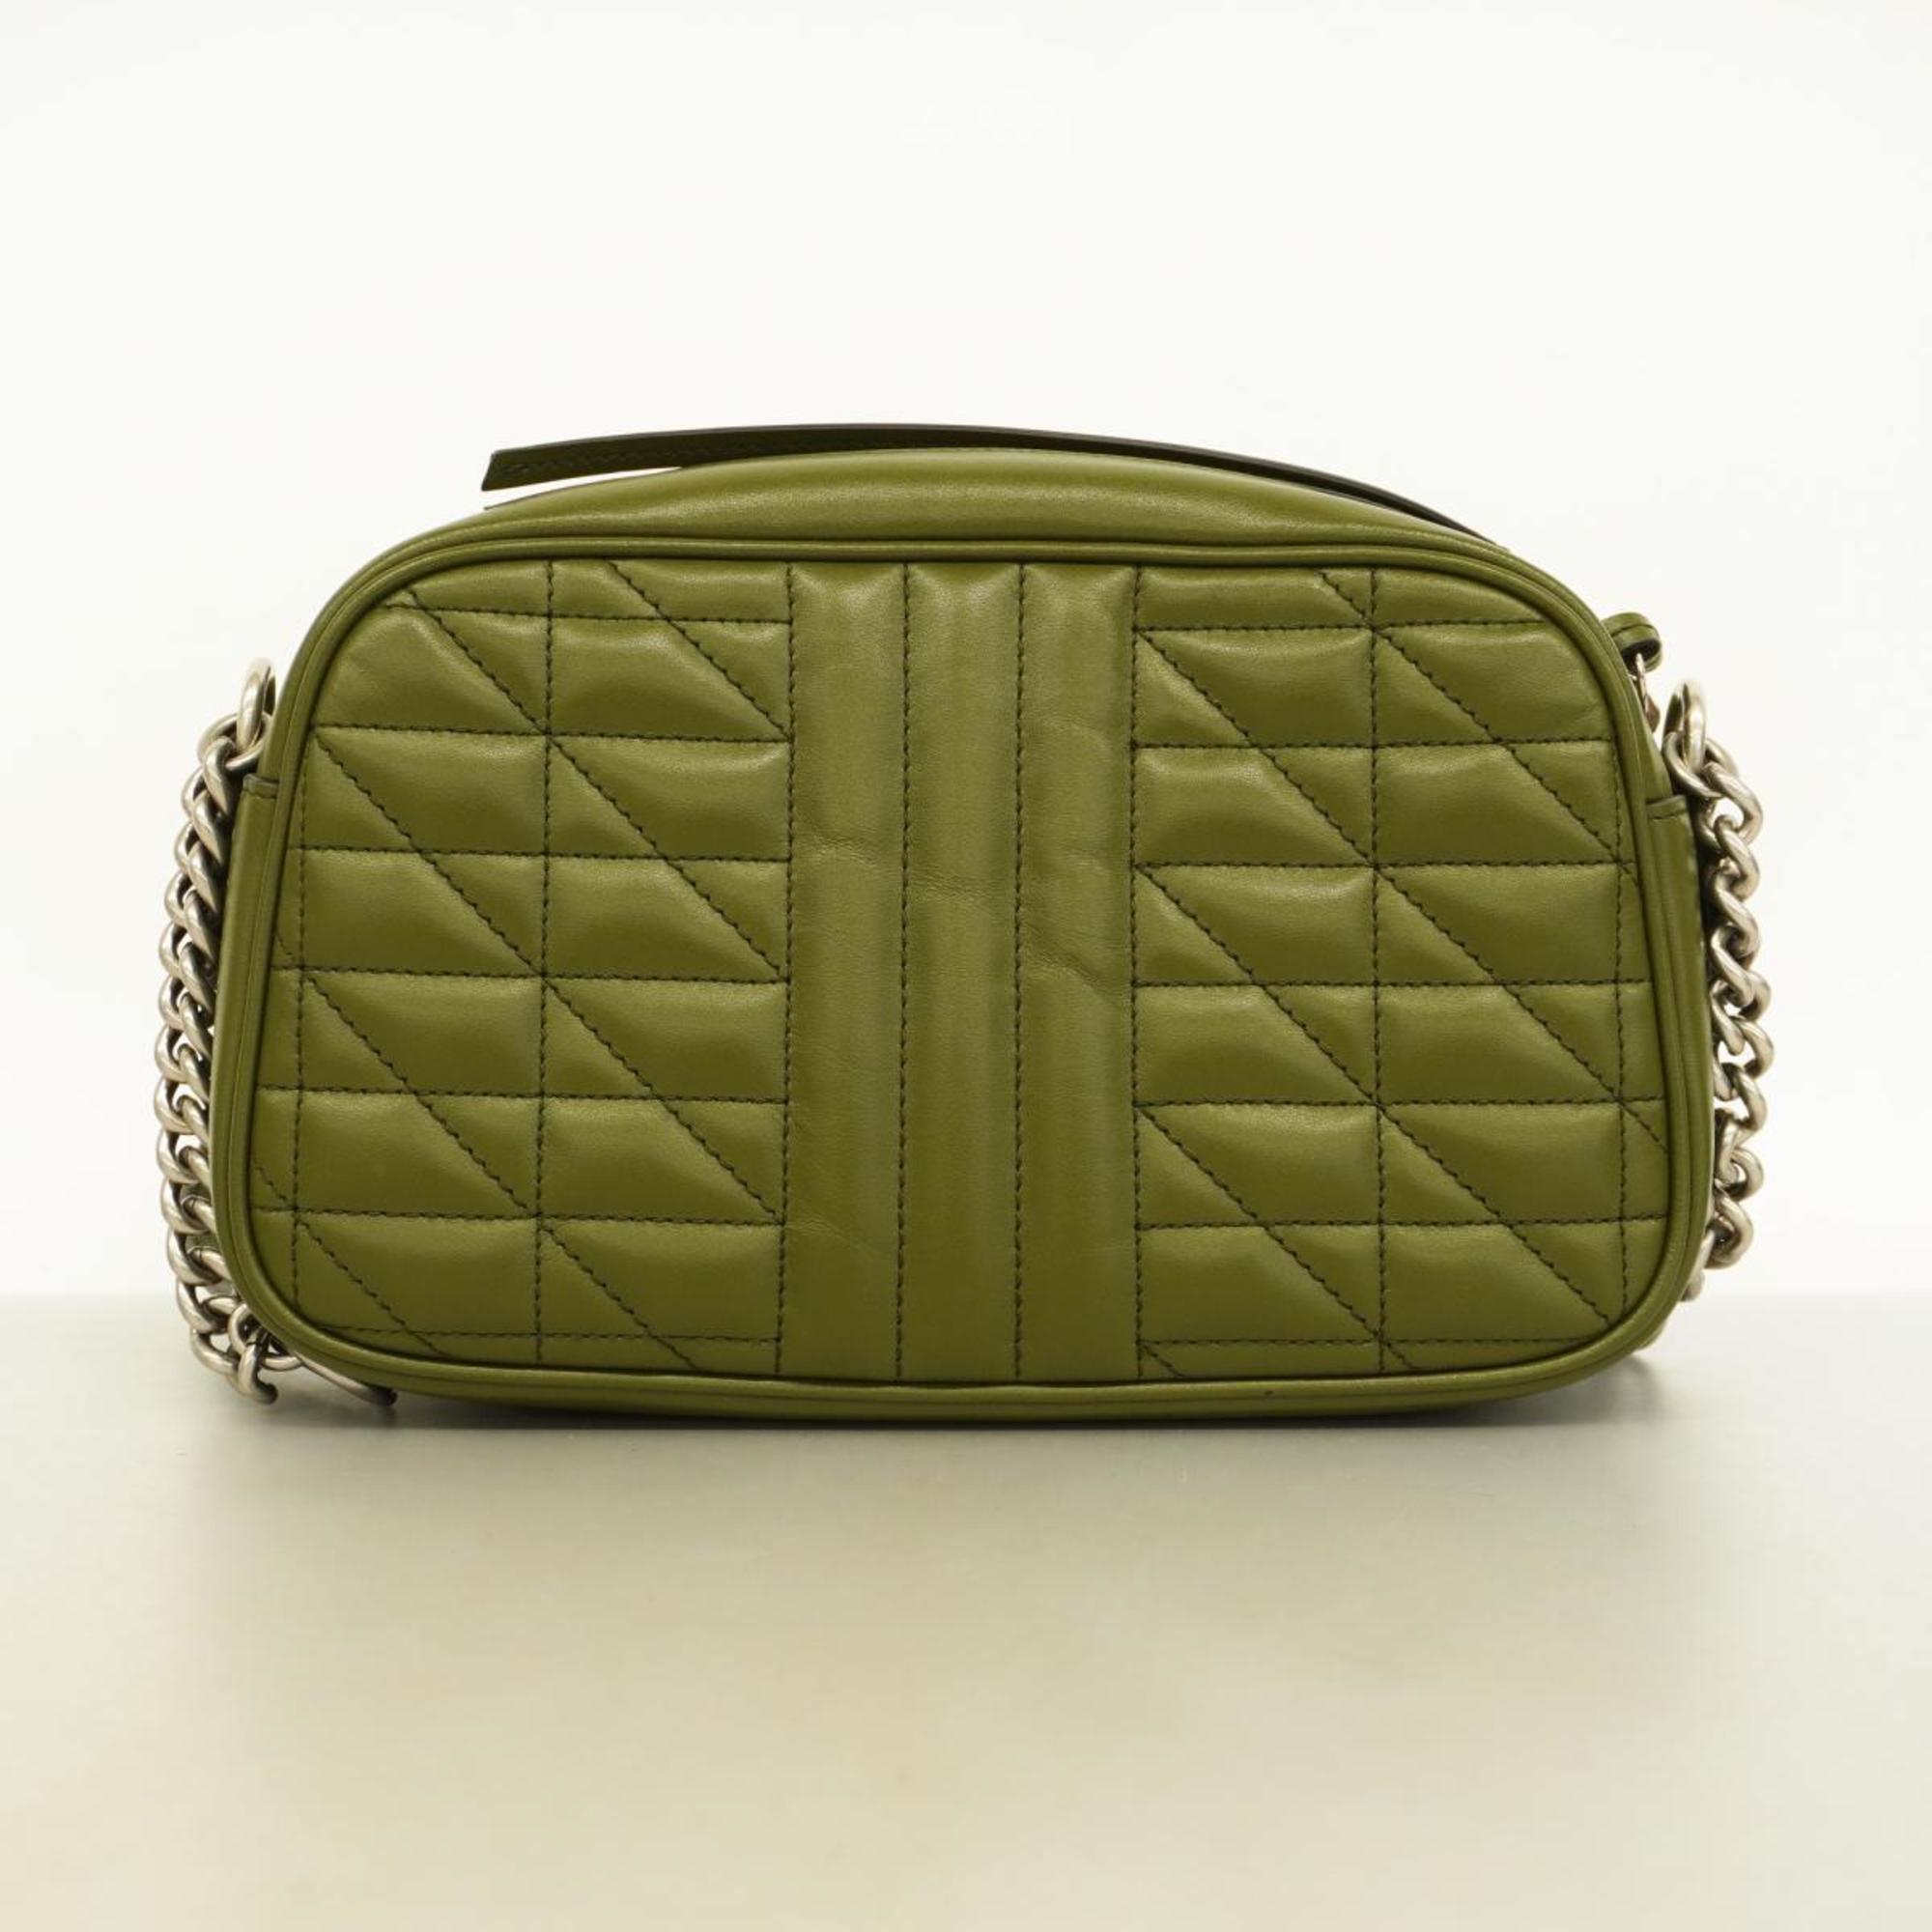 Gucci Shoulder Bag GG Marmont 447632 Leather Green Women's